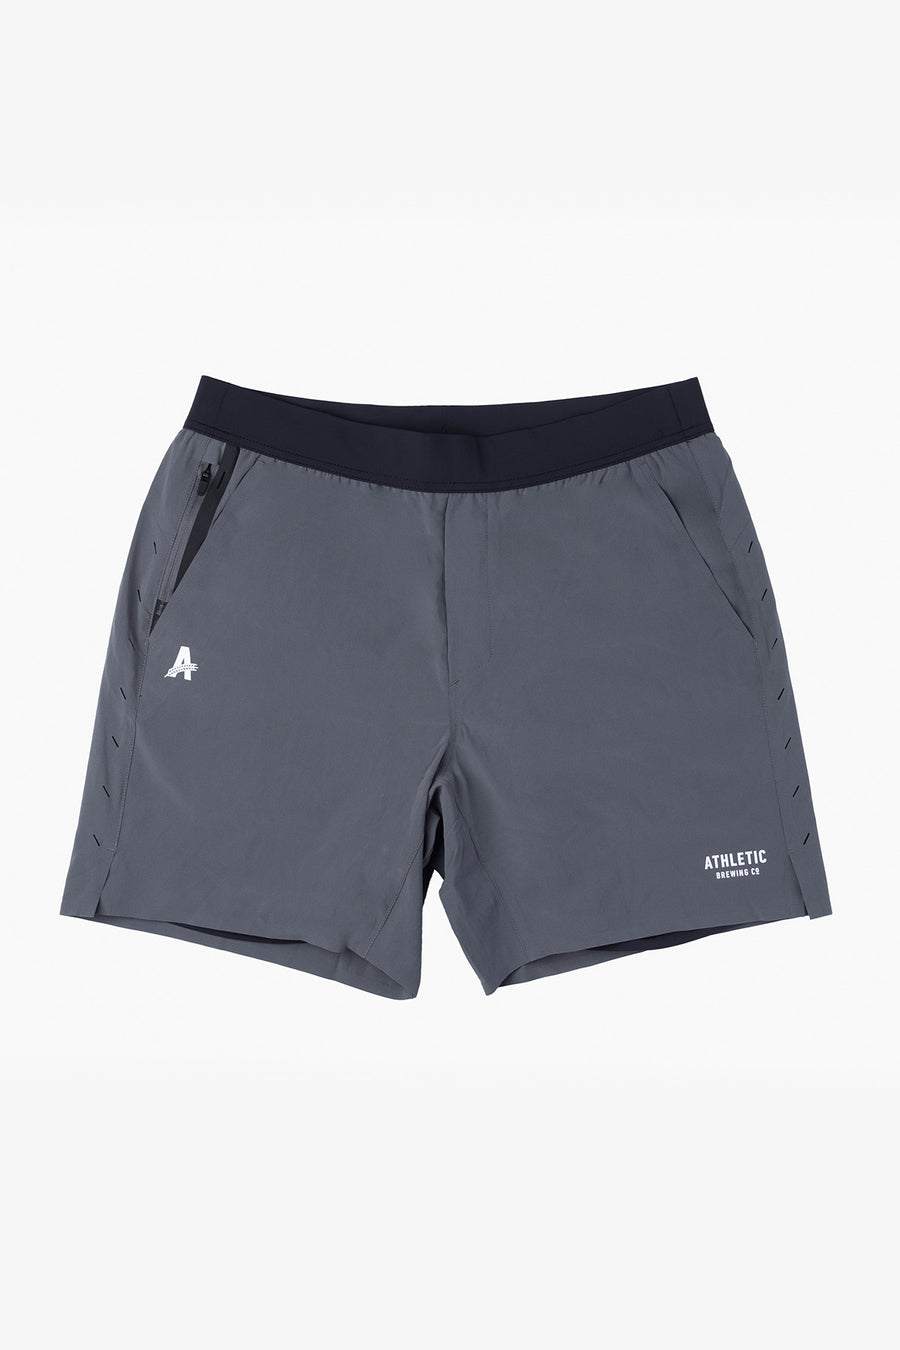 Athletic Brewing Ten Thousand Men's Interval Short - 7" inseam with Liner